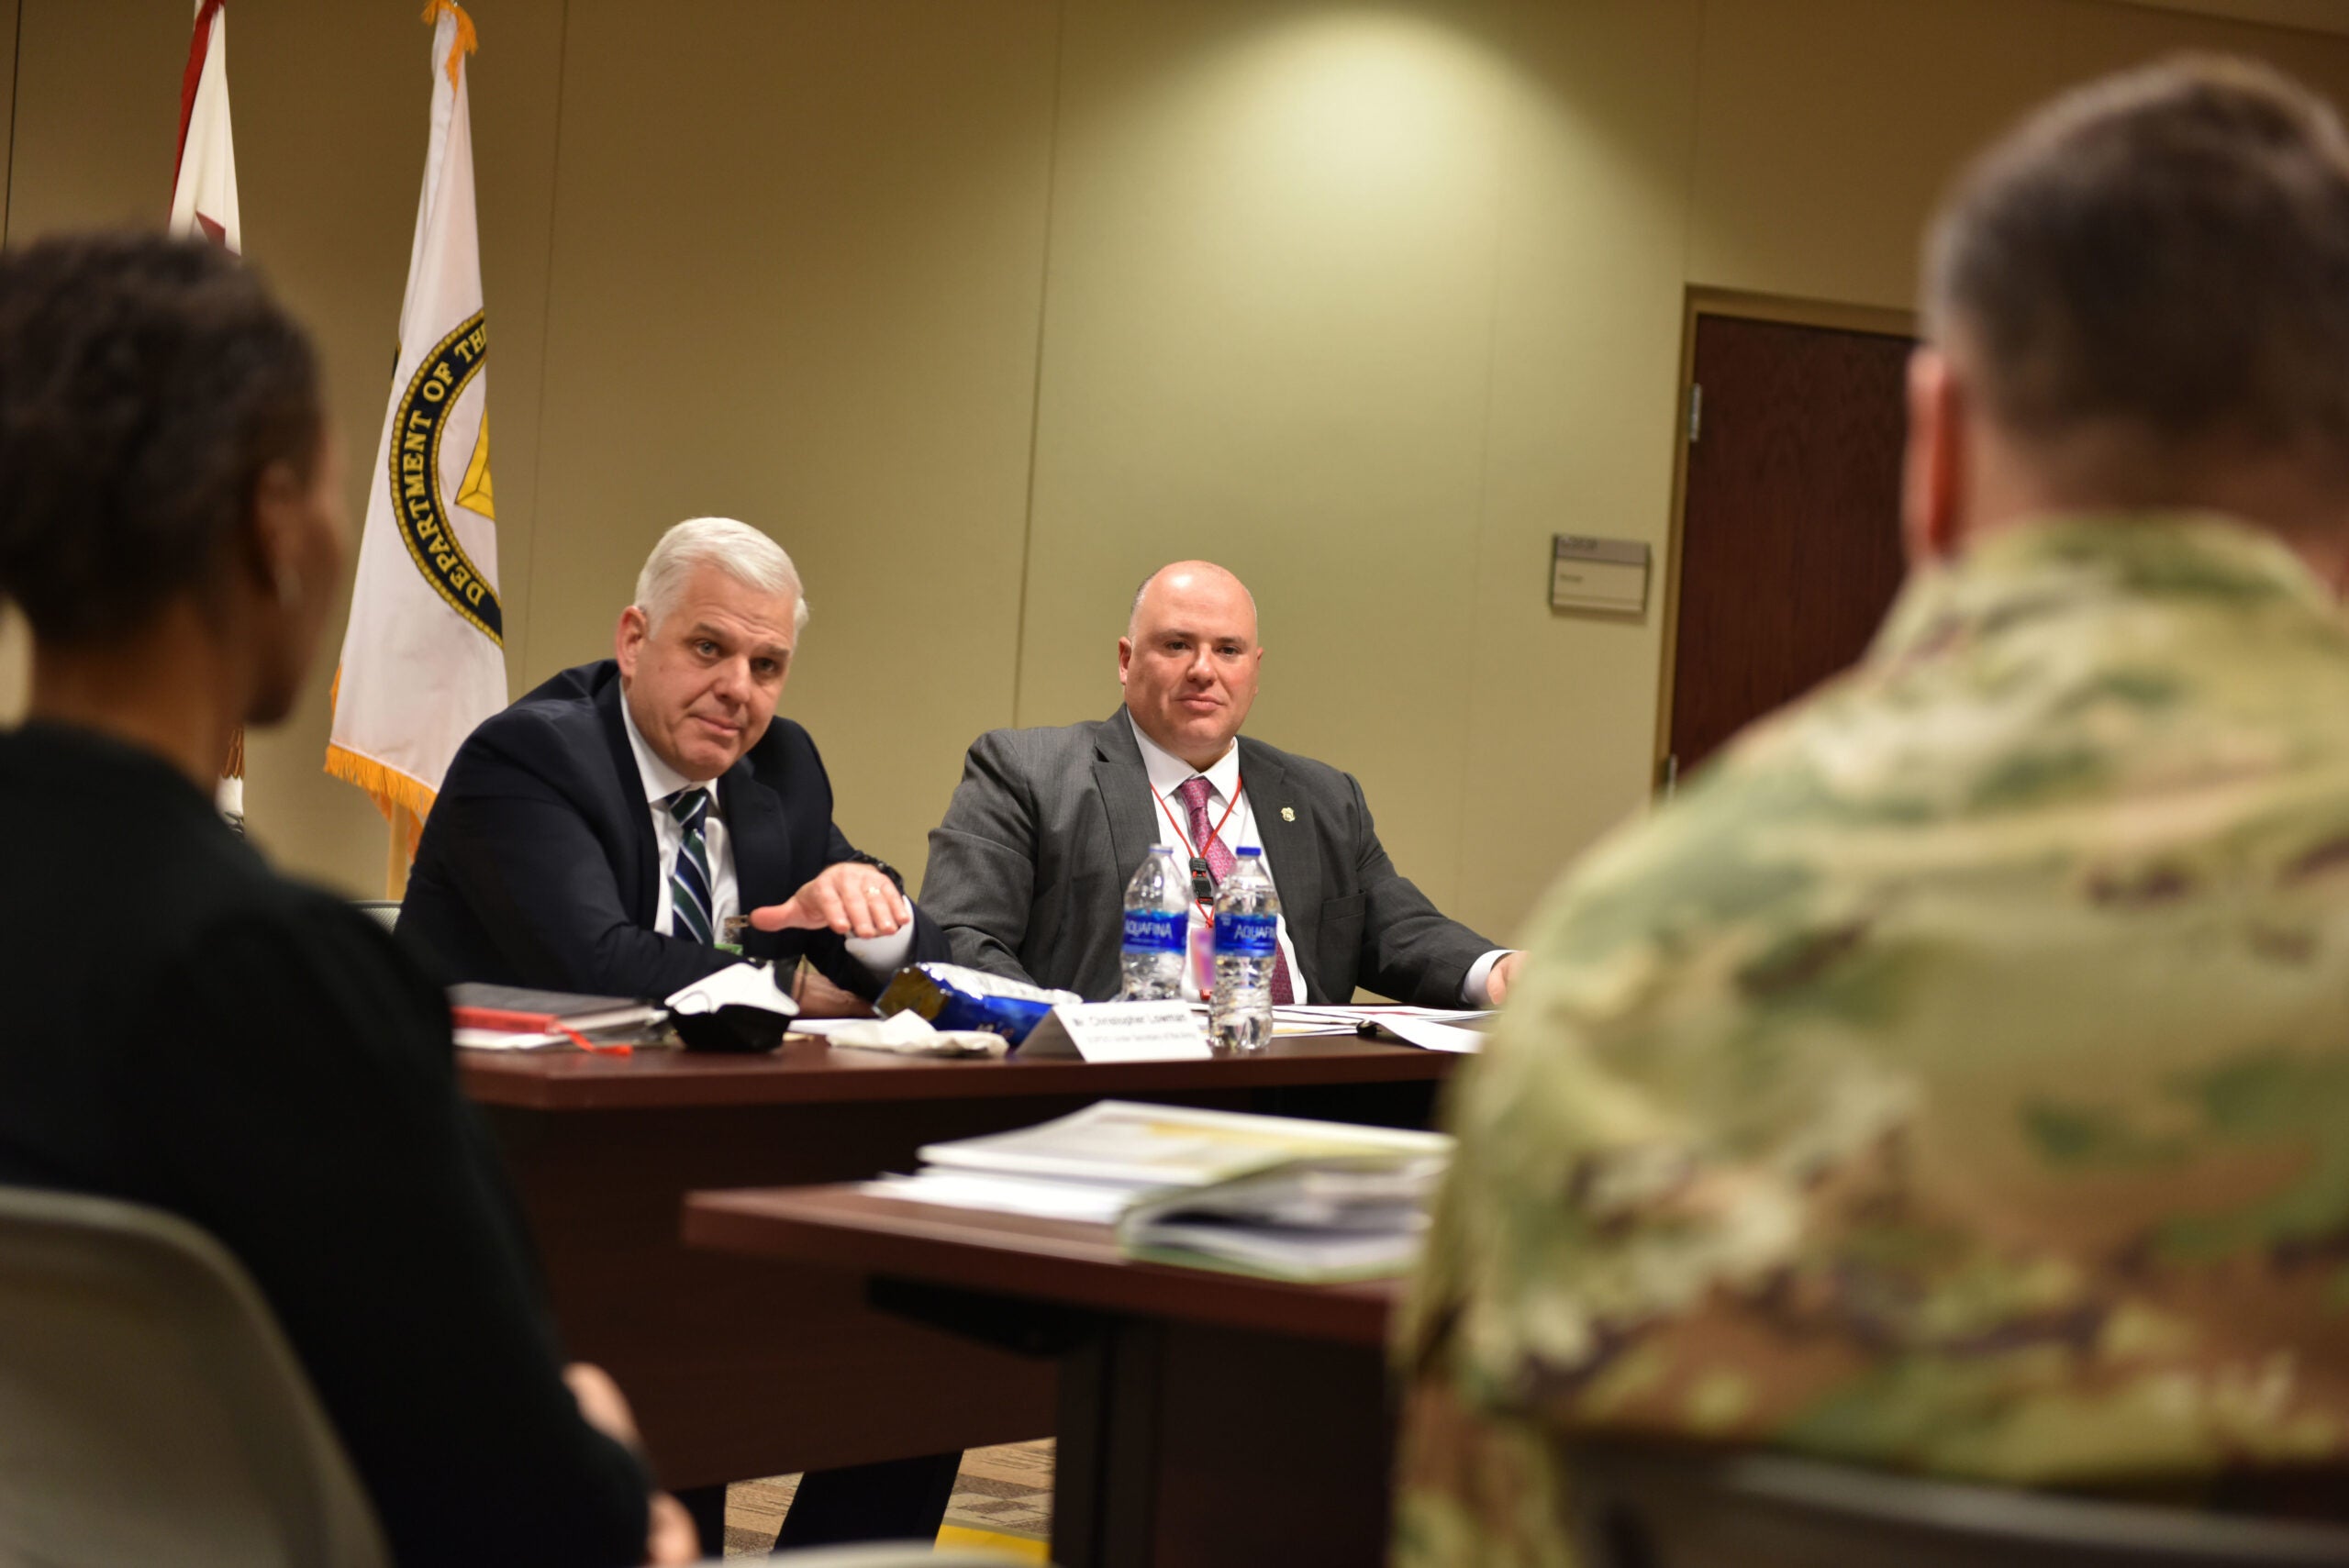 The Hon. Christopher Lowman, left, speaks to CID senior leadership during a visit to the CID Headquarters at Marine Corps Base Quantico, Virginia, Jan. 25, 2022.